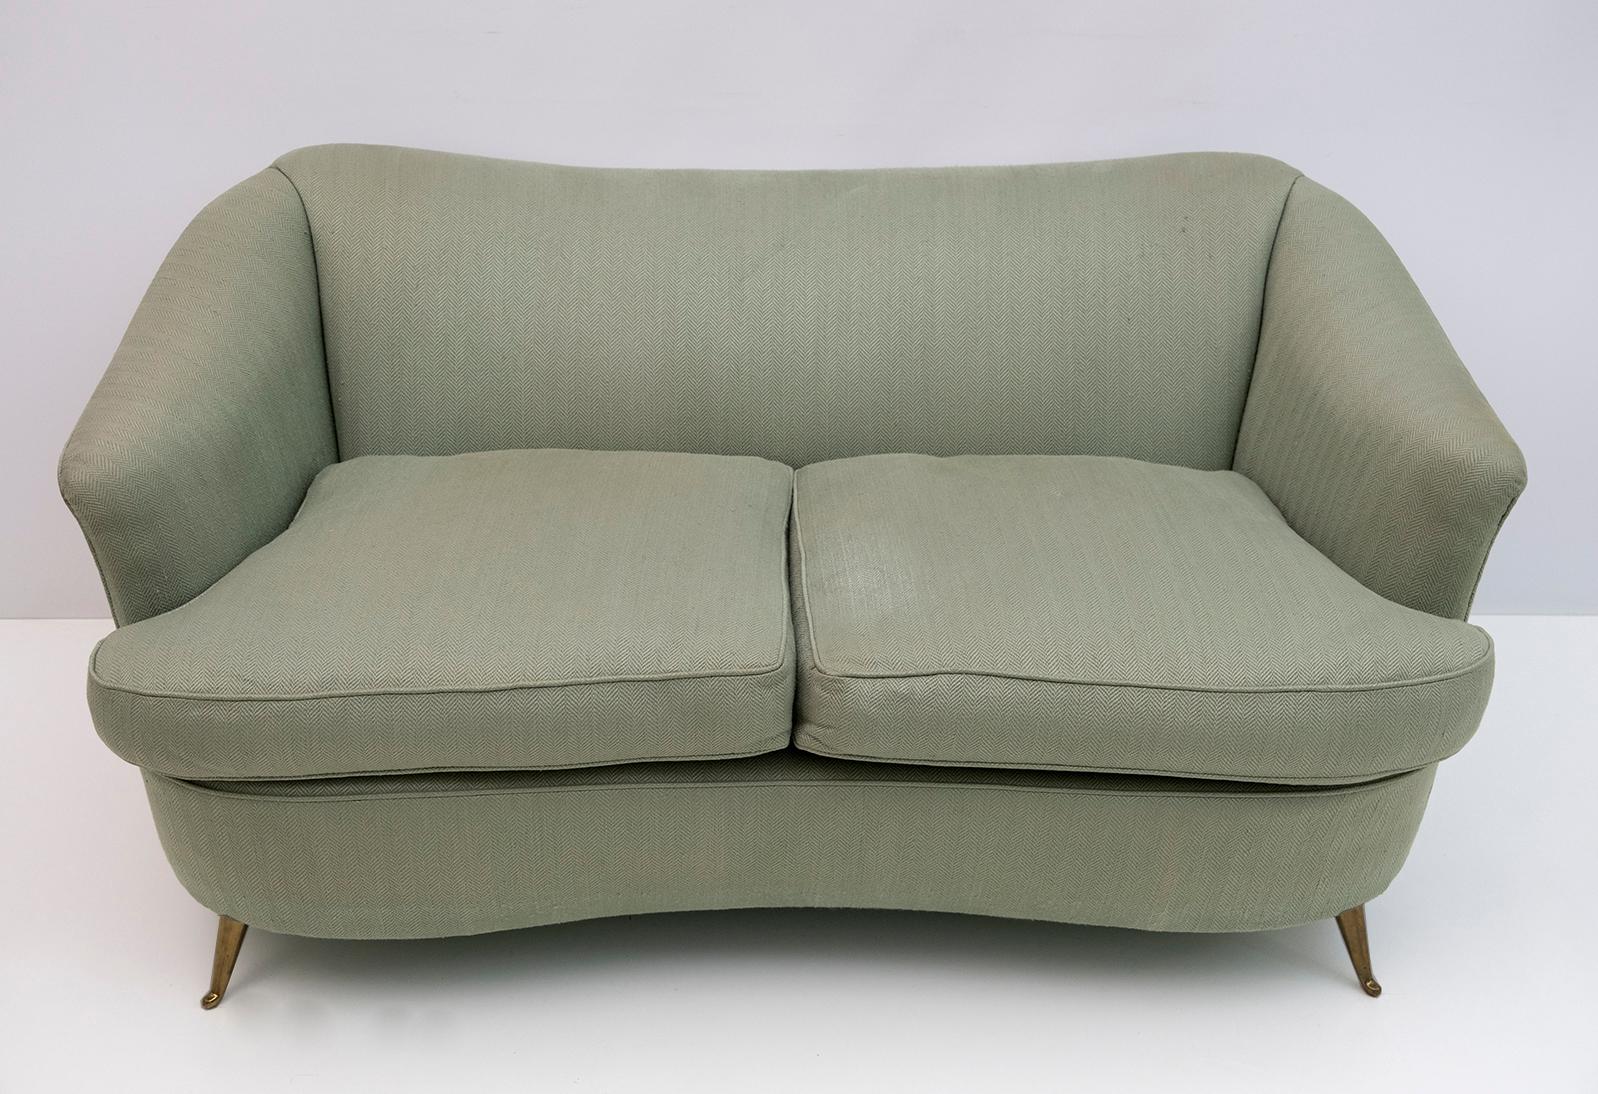 Vintage collectible two-seater sofa attributed Gio Ponti for the Casa e Giardino manufacturing company in the late 1930s.
The upholstery was redone more than 20 years ago but is not in good condition, new upholstery is recommended.